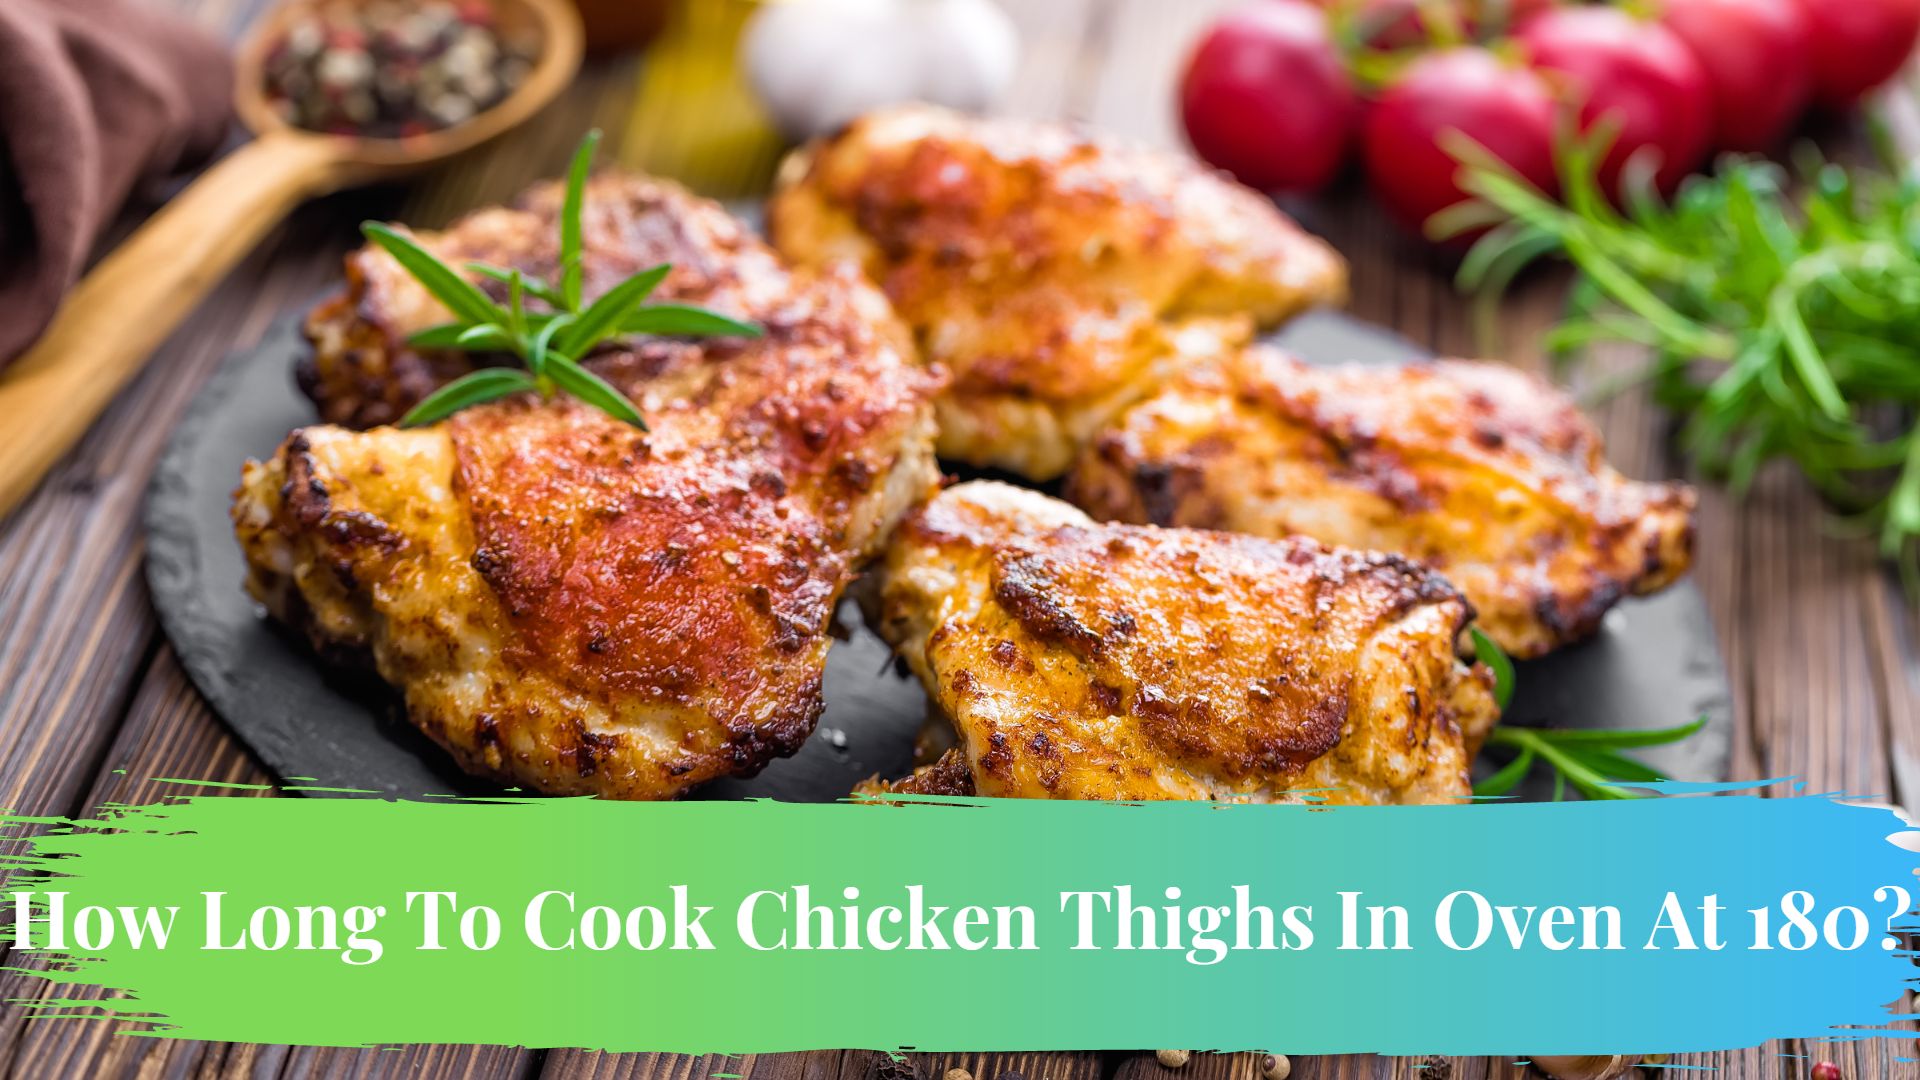 How Long To Cook Chicken Thighs In Oven At 180